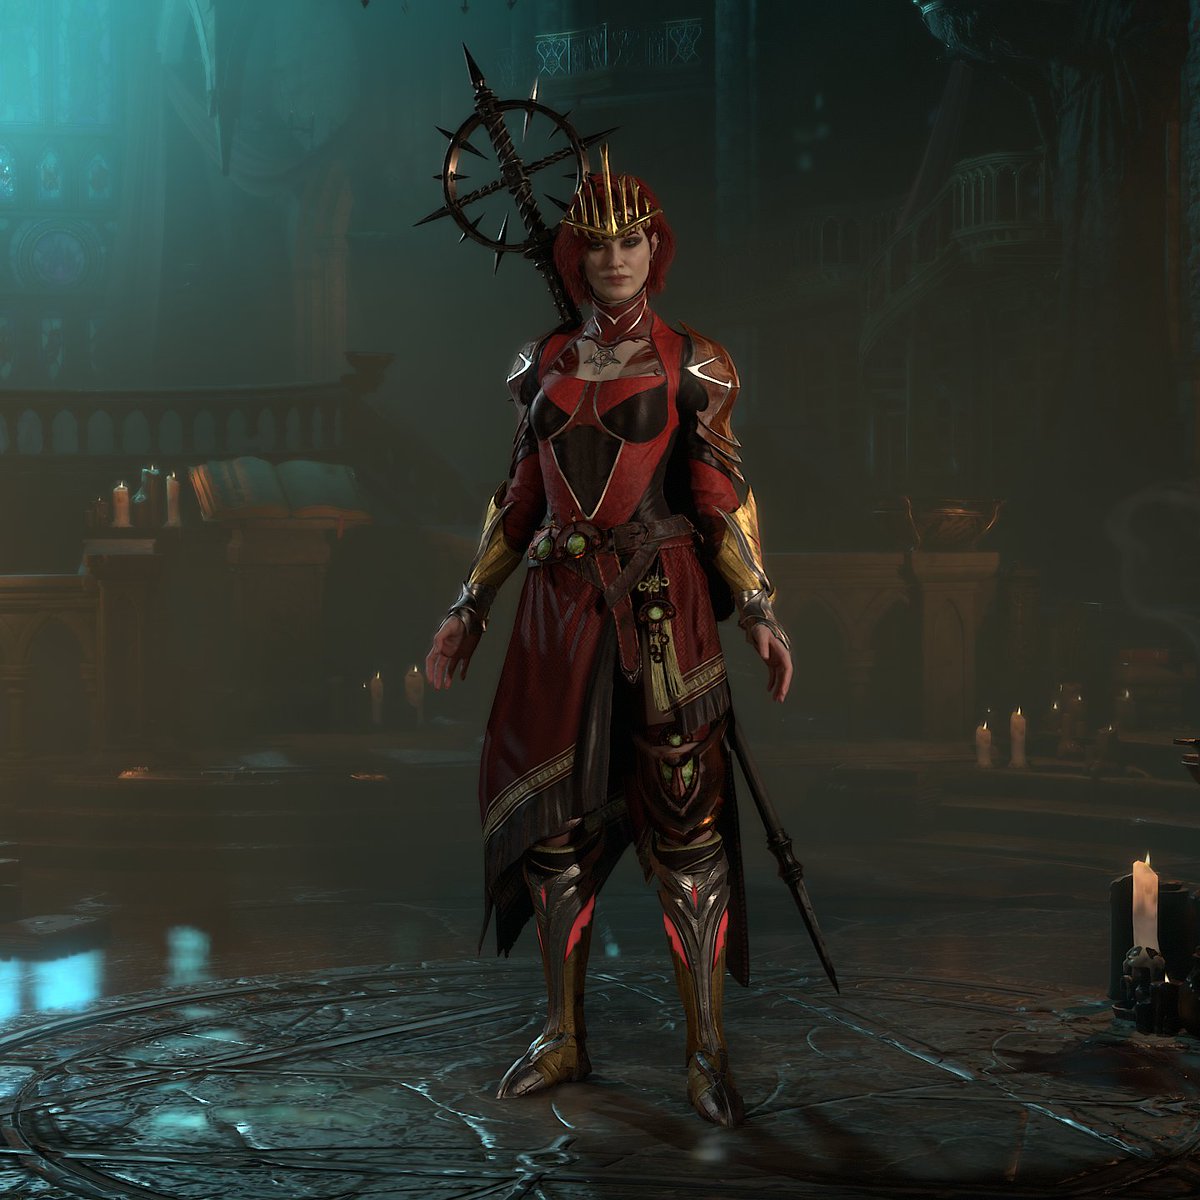 Getting closer to finish the main campaign with my sorcerer, hopefully on time to start the next seasonal content #diablo4